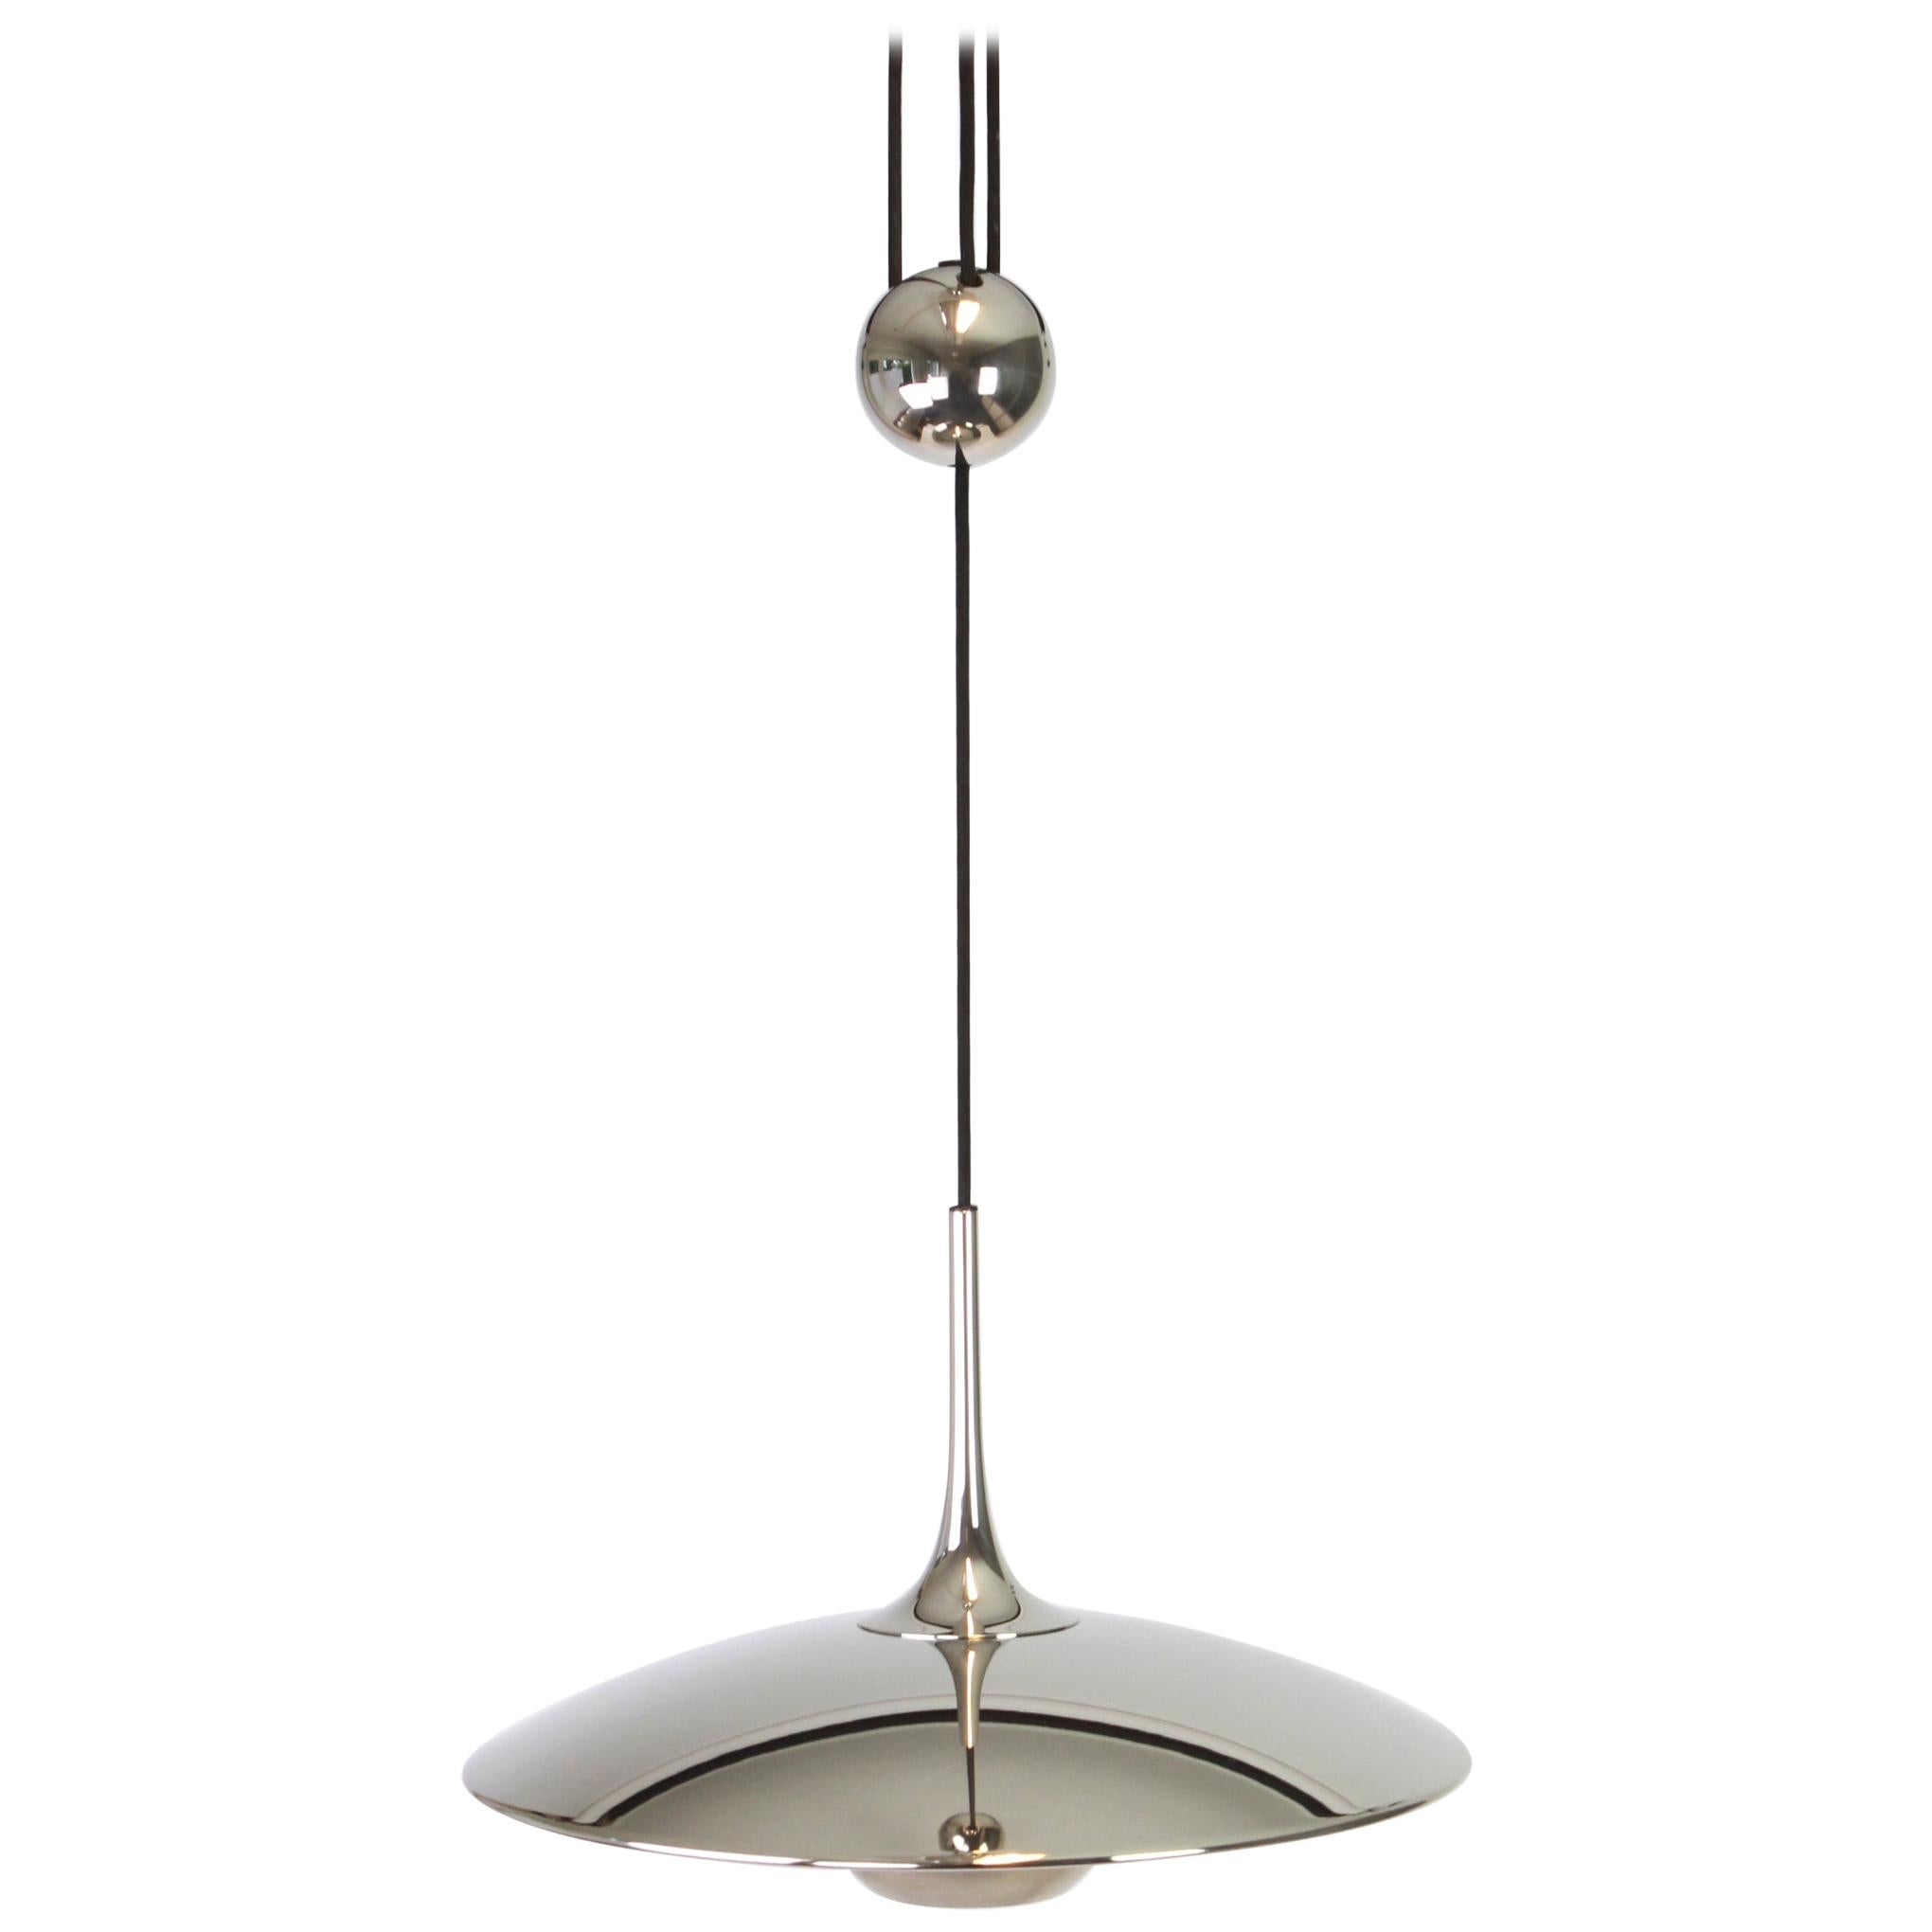 Large adjustable chrome counterweight pendant light designed by Florian Schulz Onos 55, Germany, 1970s.
Socket: 1 x standard bulb - E27 - Up to 150 Watt - and compatible with the US/UK/ etc. standards.

Very good condition.
The listed height is